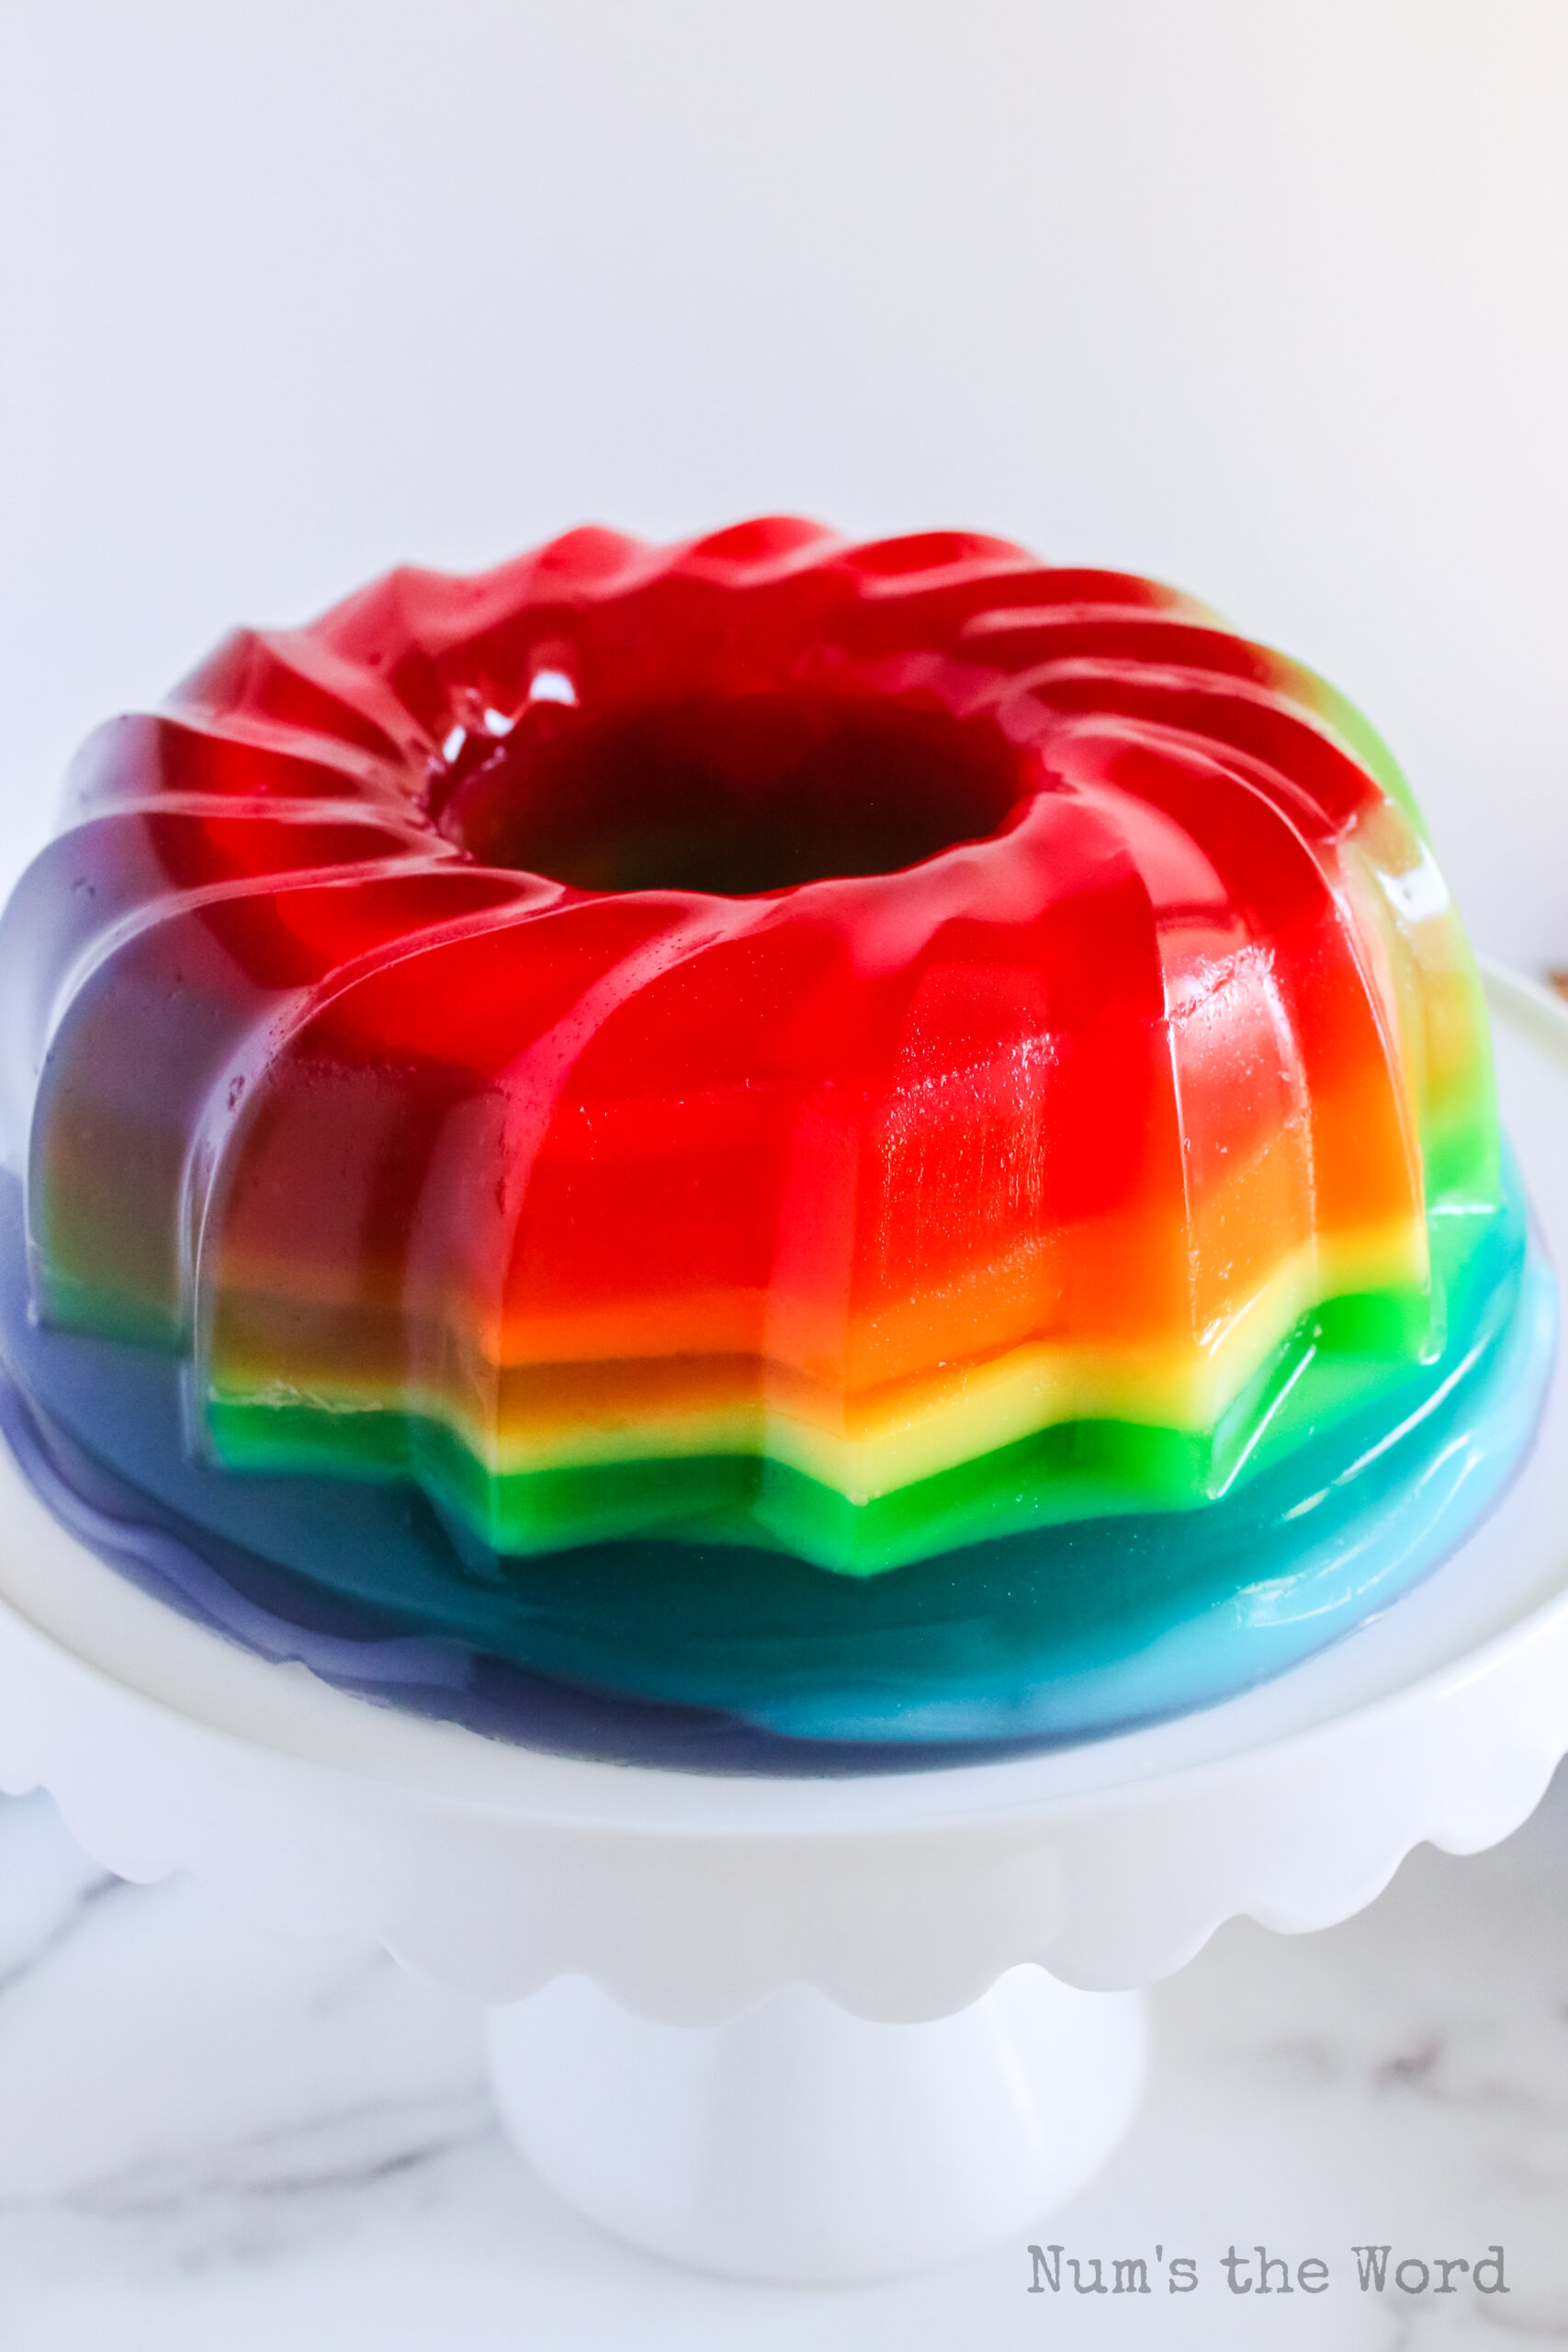 zoomed out image of jello fresh from the mold and on a platter, ready to be sliced and served